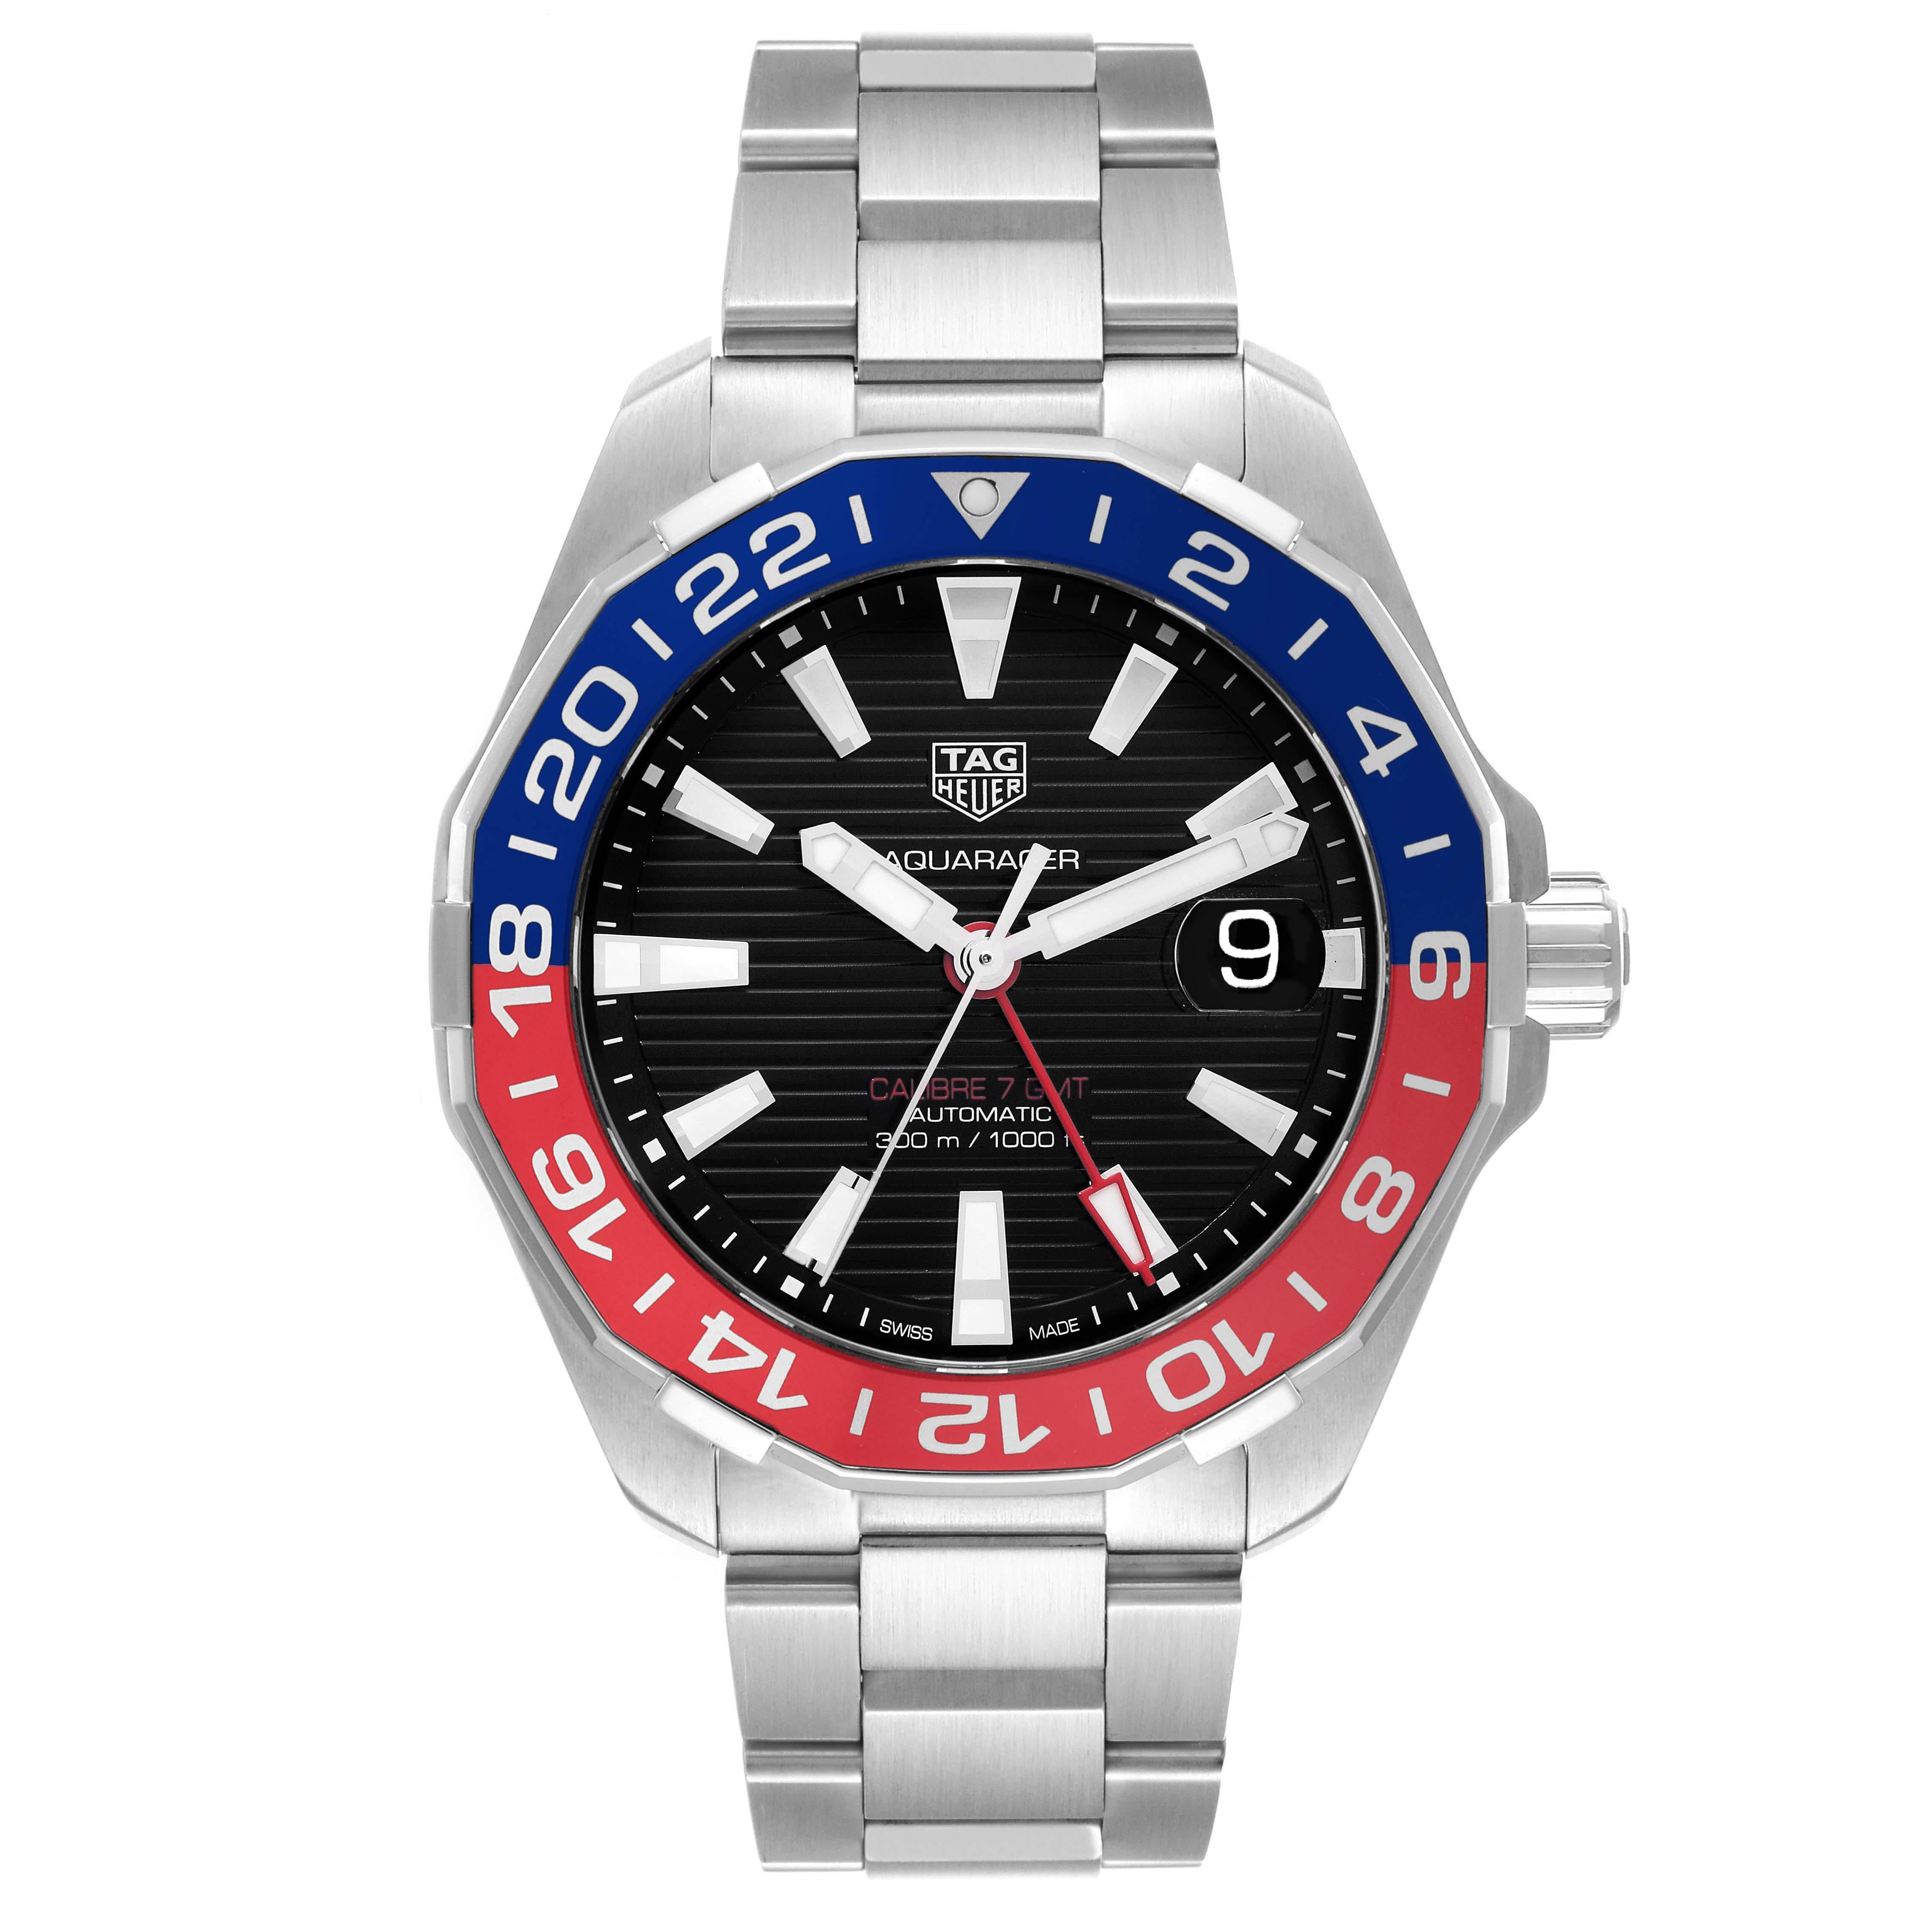 Tag Heuer Aquaracer Pepsi Bezel Steel Mens Watch WAY201F Box Card. Automatic self-winding movement. Stainless steel case 43.0 mm in diameter. Stainless steel blue and red 